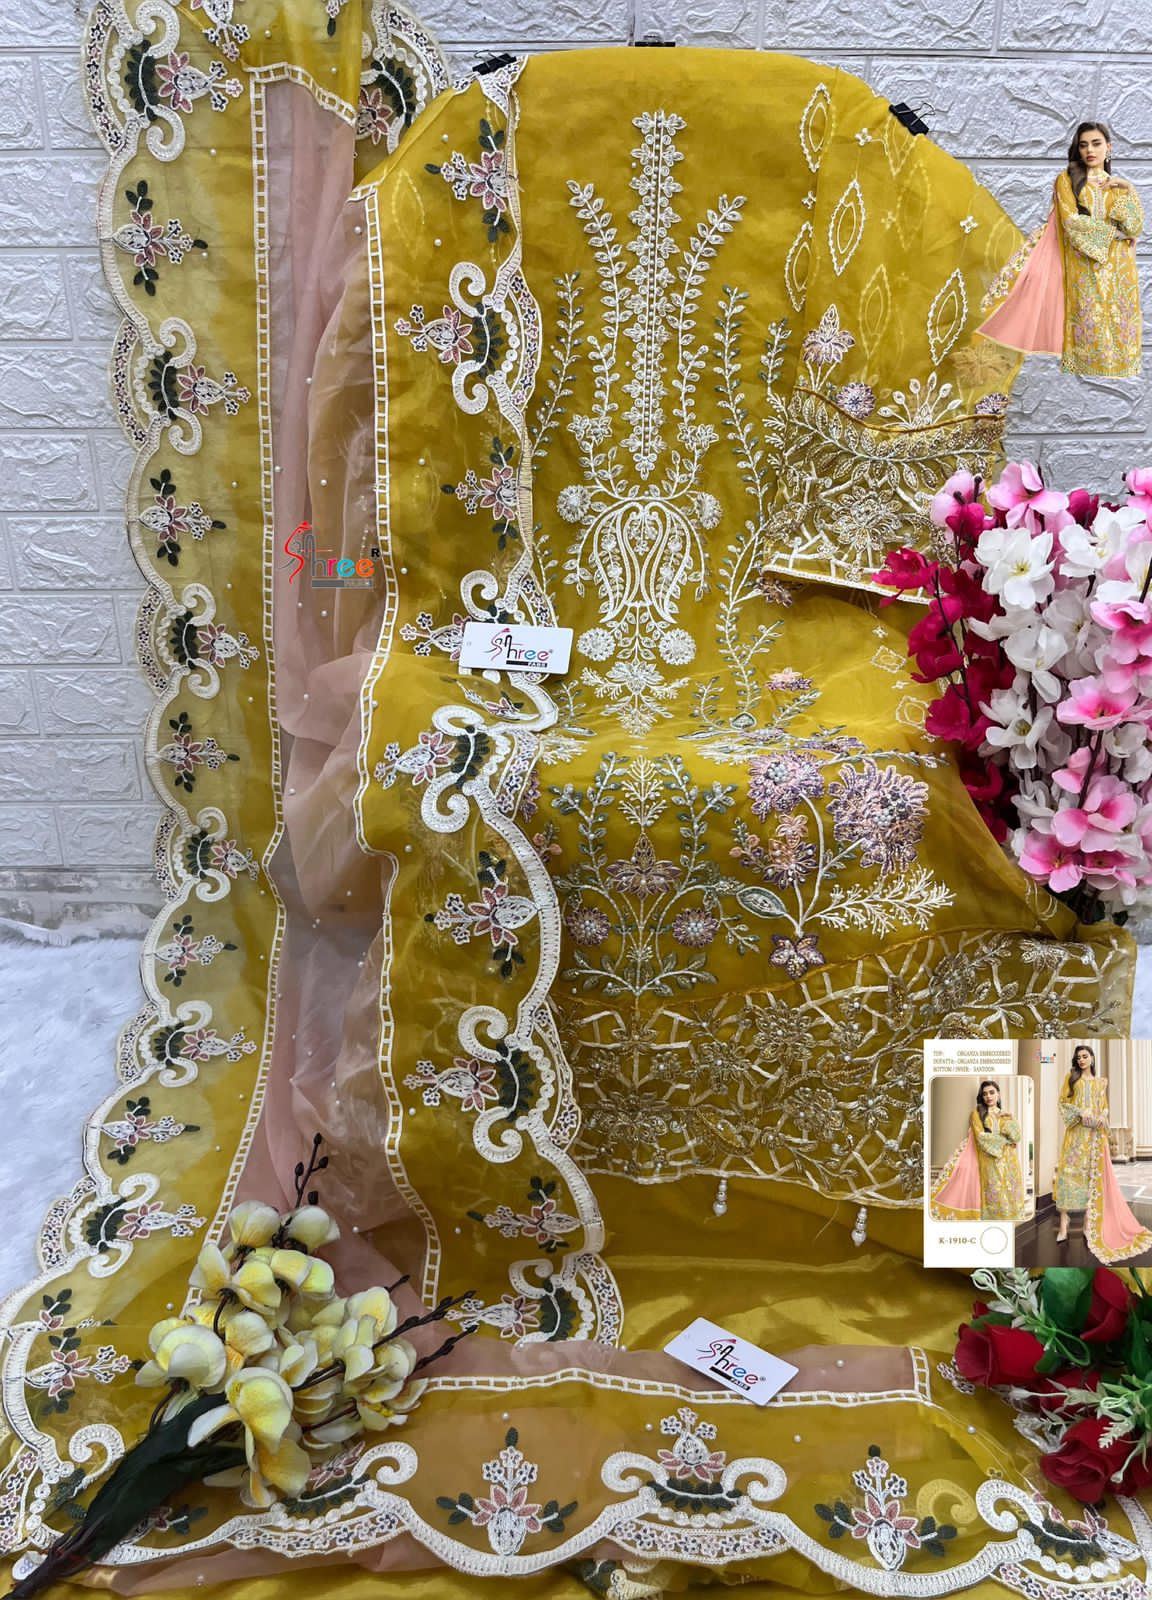 Shree Fabs K 1910 Organza With Embroidery Work Pakistani Suits Latest Collection - jilaniwholesalesuit